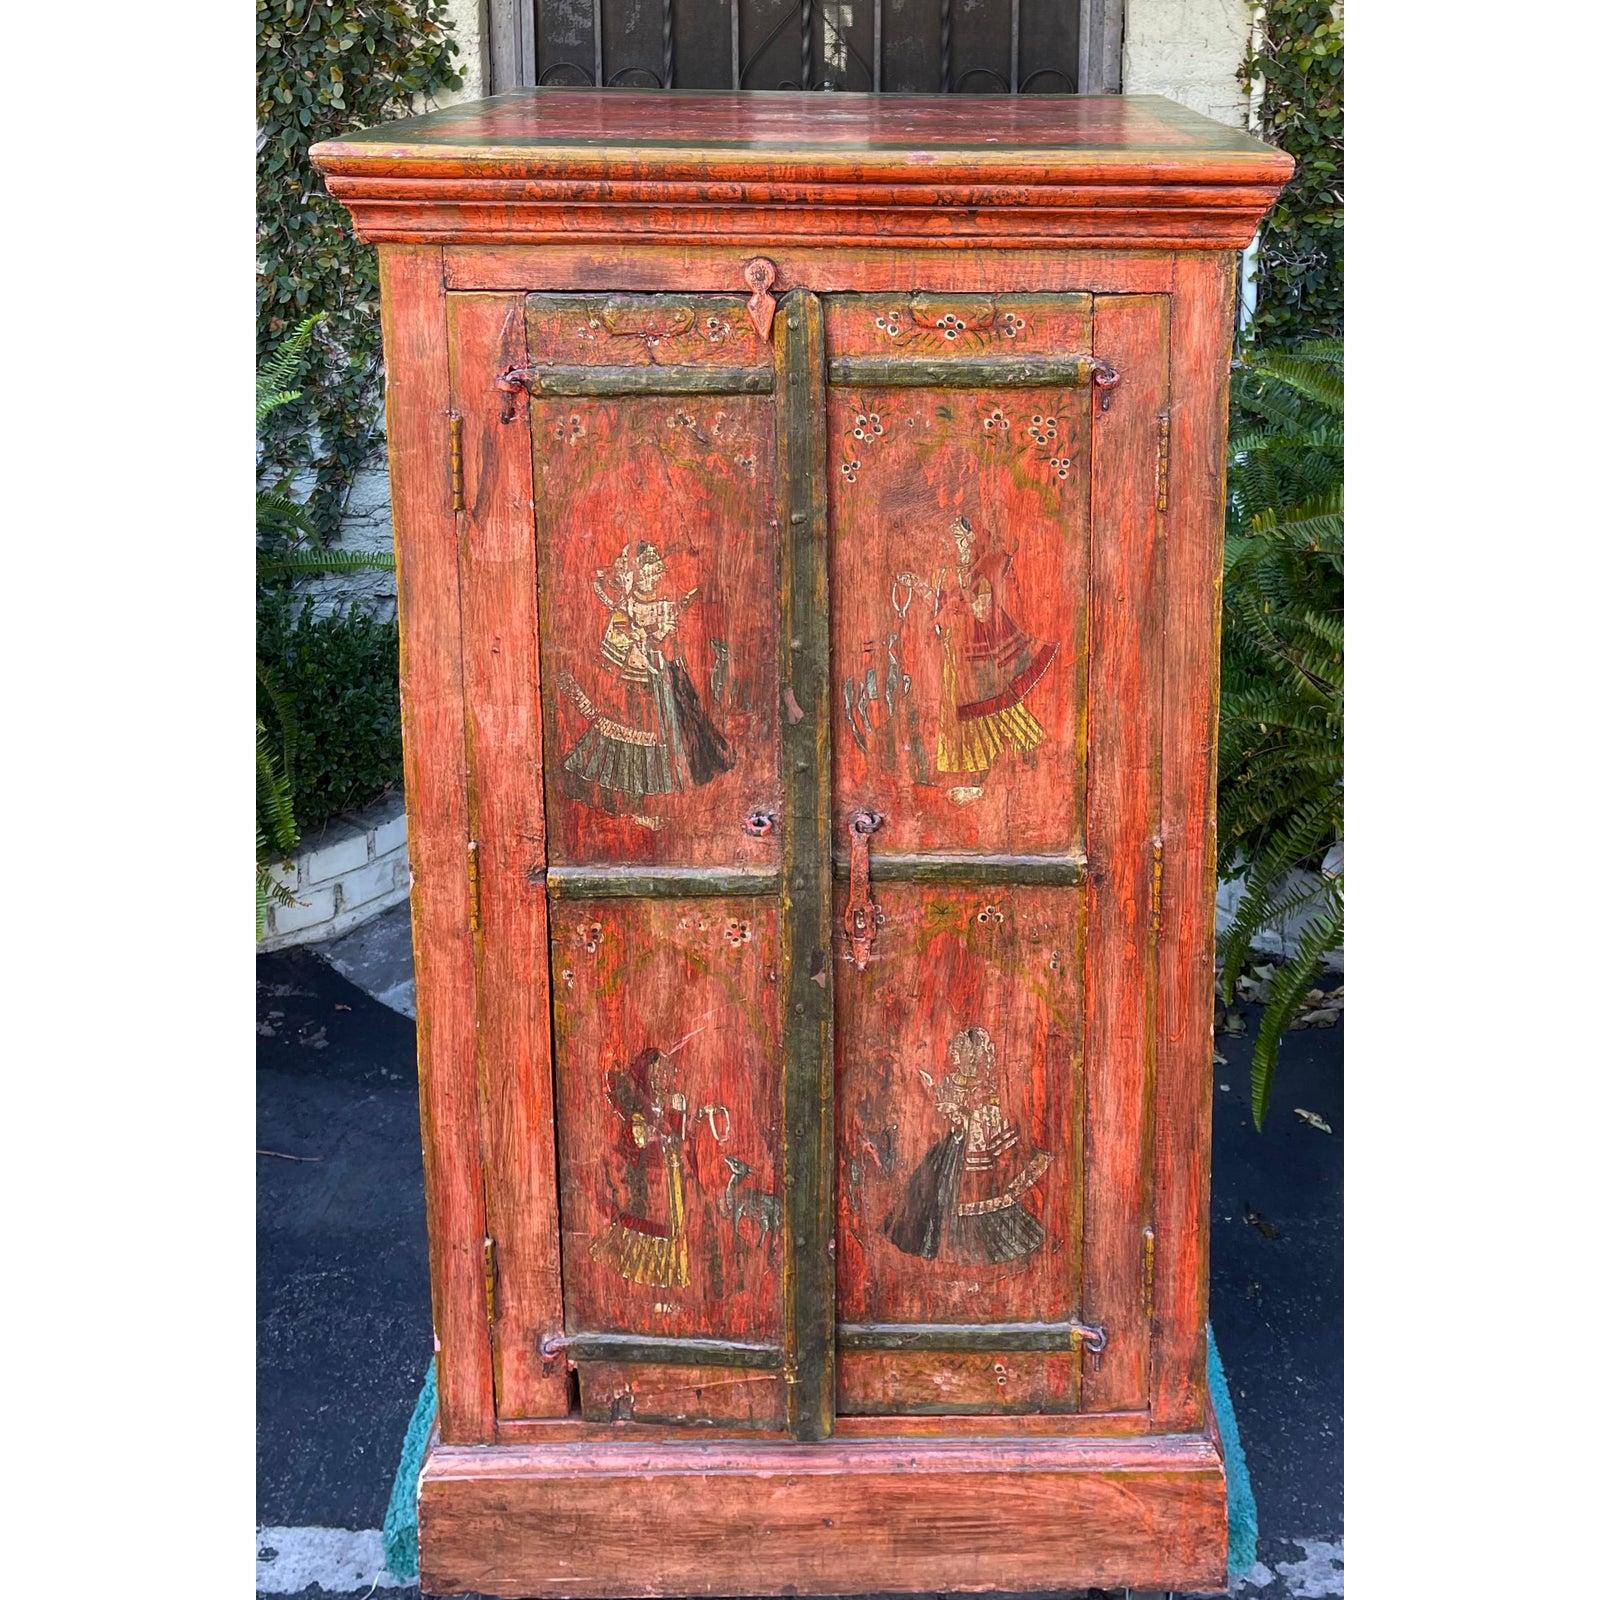 Equator Furniture Company 18th century Style Spanish Colonial Cabinet Mini Armoire. Equator made furniture utilizing reclaimed barn wood or pieces of Vintage furniture. This is an excellent example with an unusual scale. 

Additional